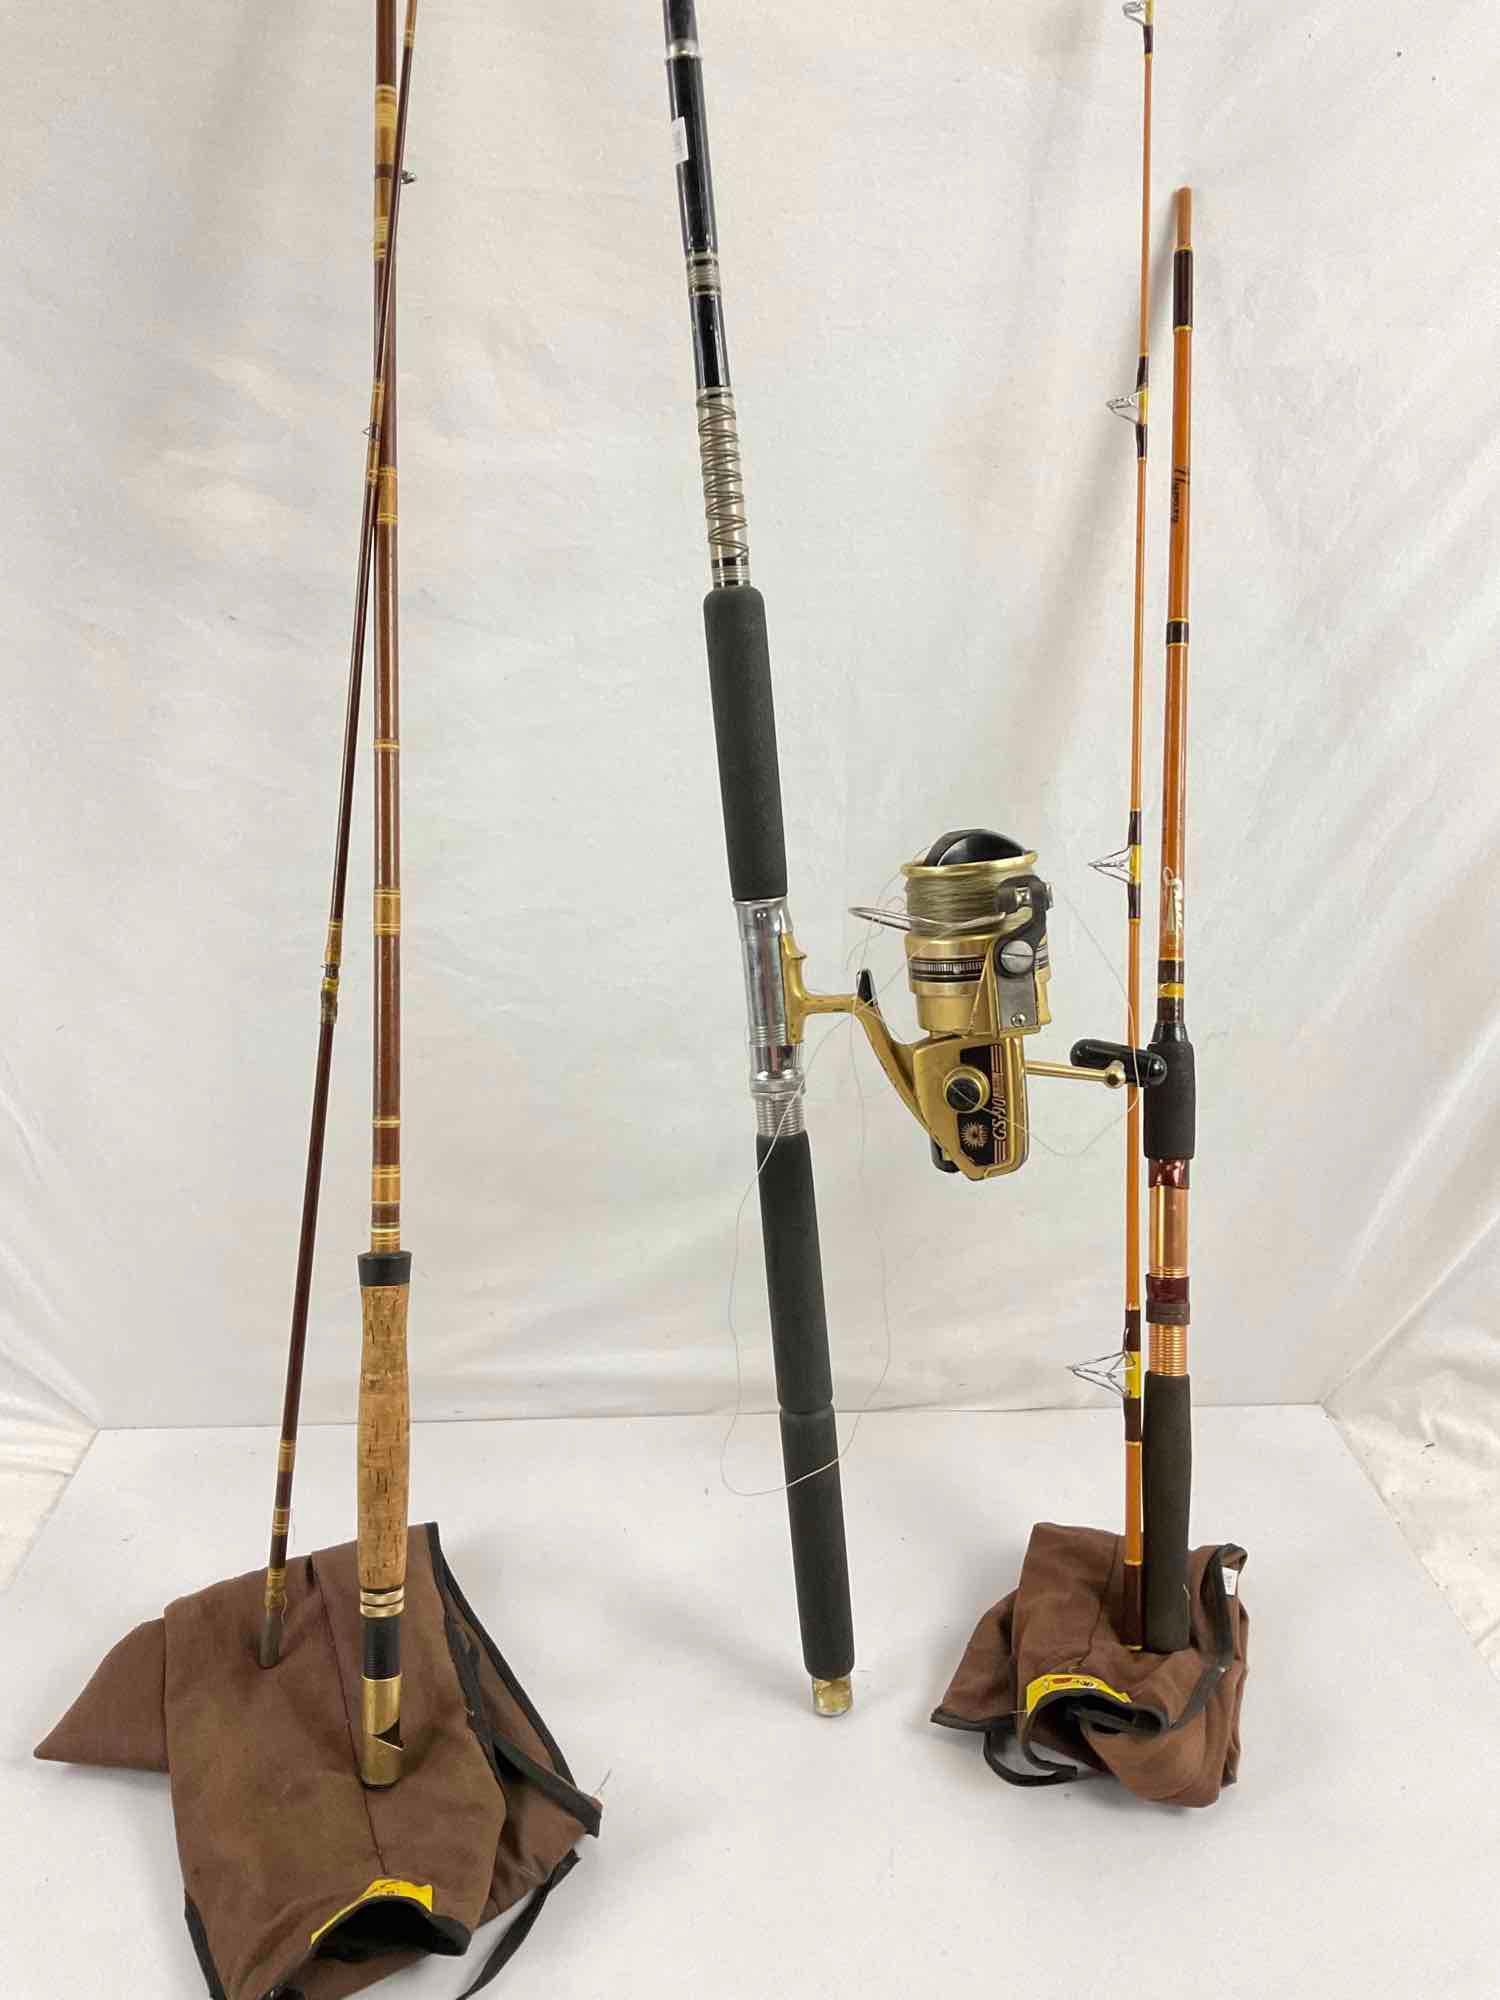 Collection of Vintage Fishing Rods with 1 reel.